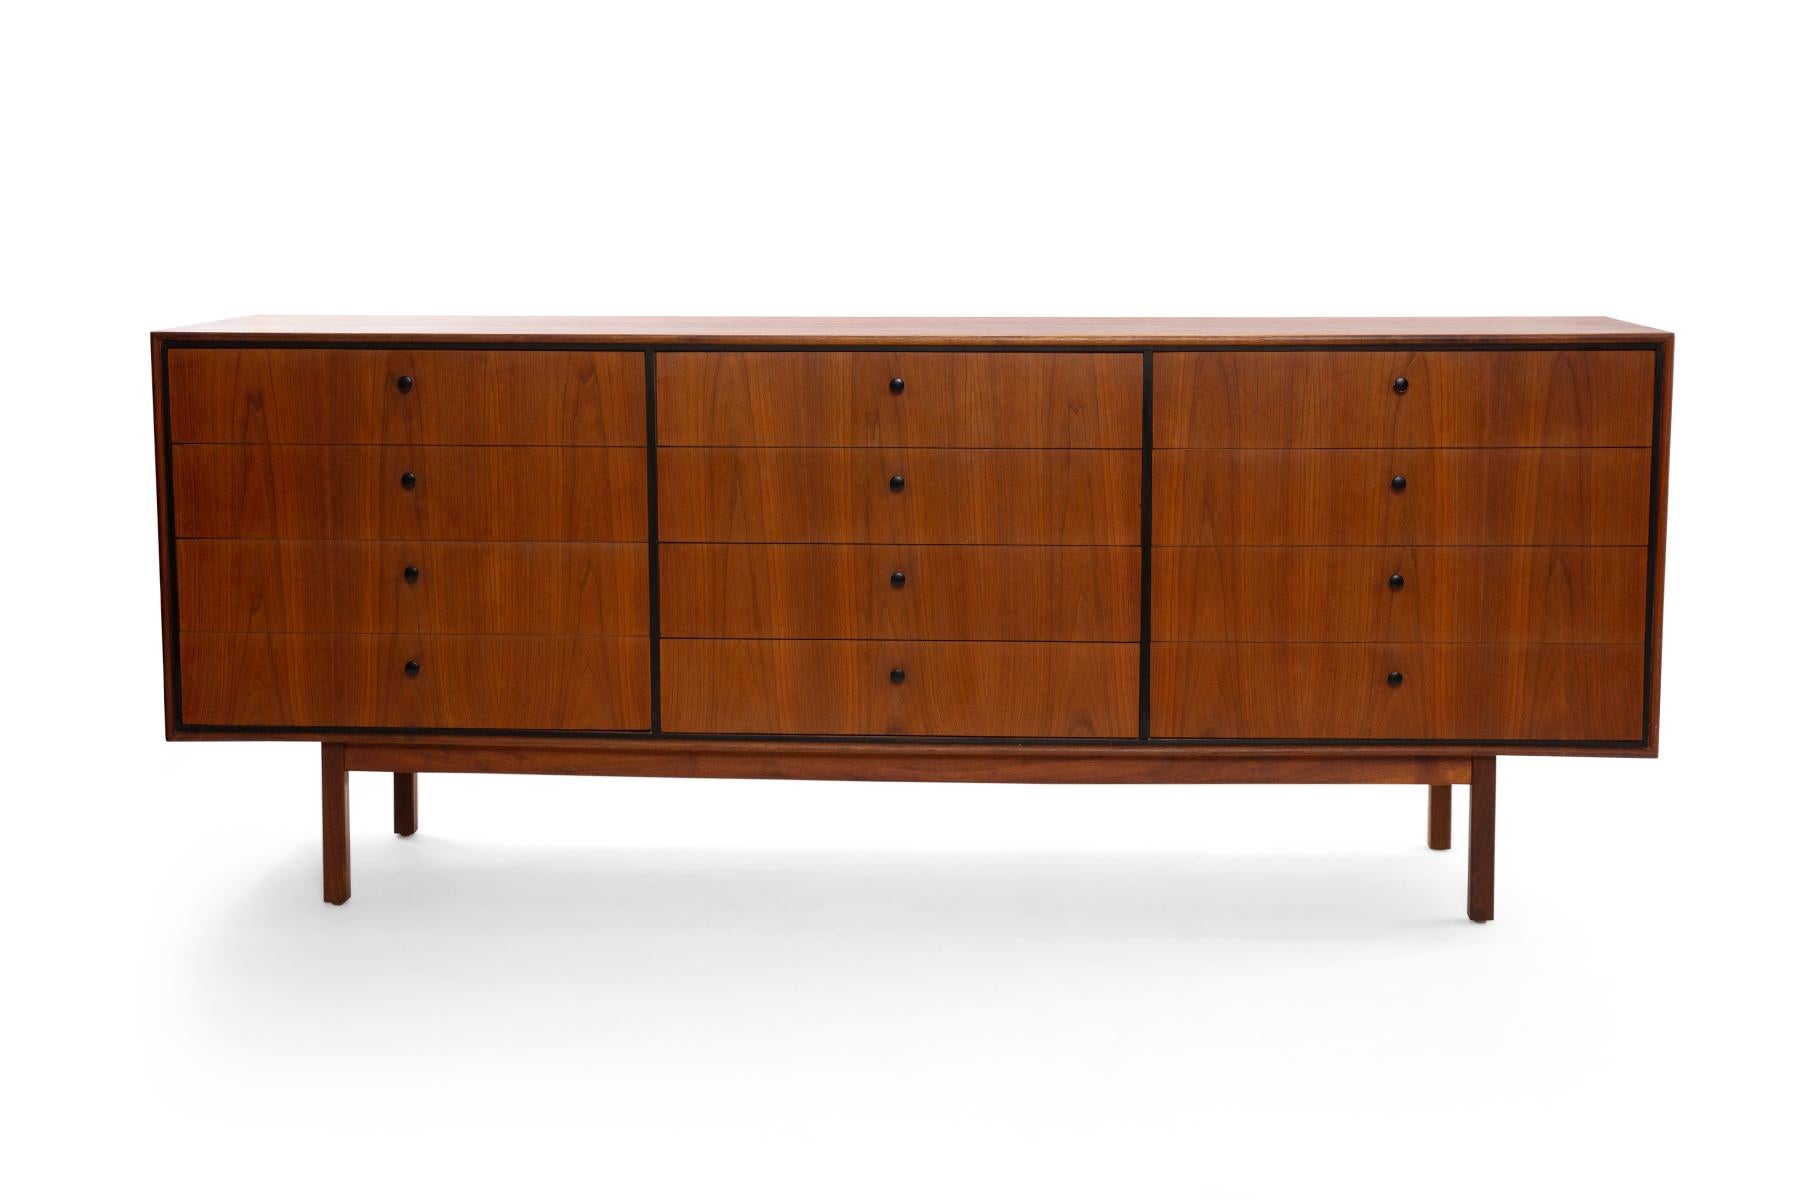 Milo Baughman for Glenn of California 12 drawer dresser circa mid-1960s. This example has incredible graining to the walnut case and drawer fronts, sculpted drawer pulls and lots of storage.